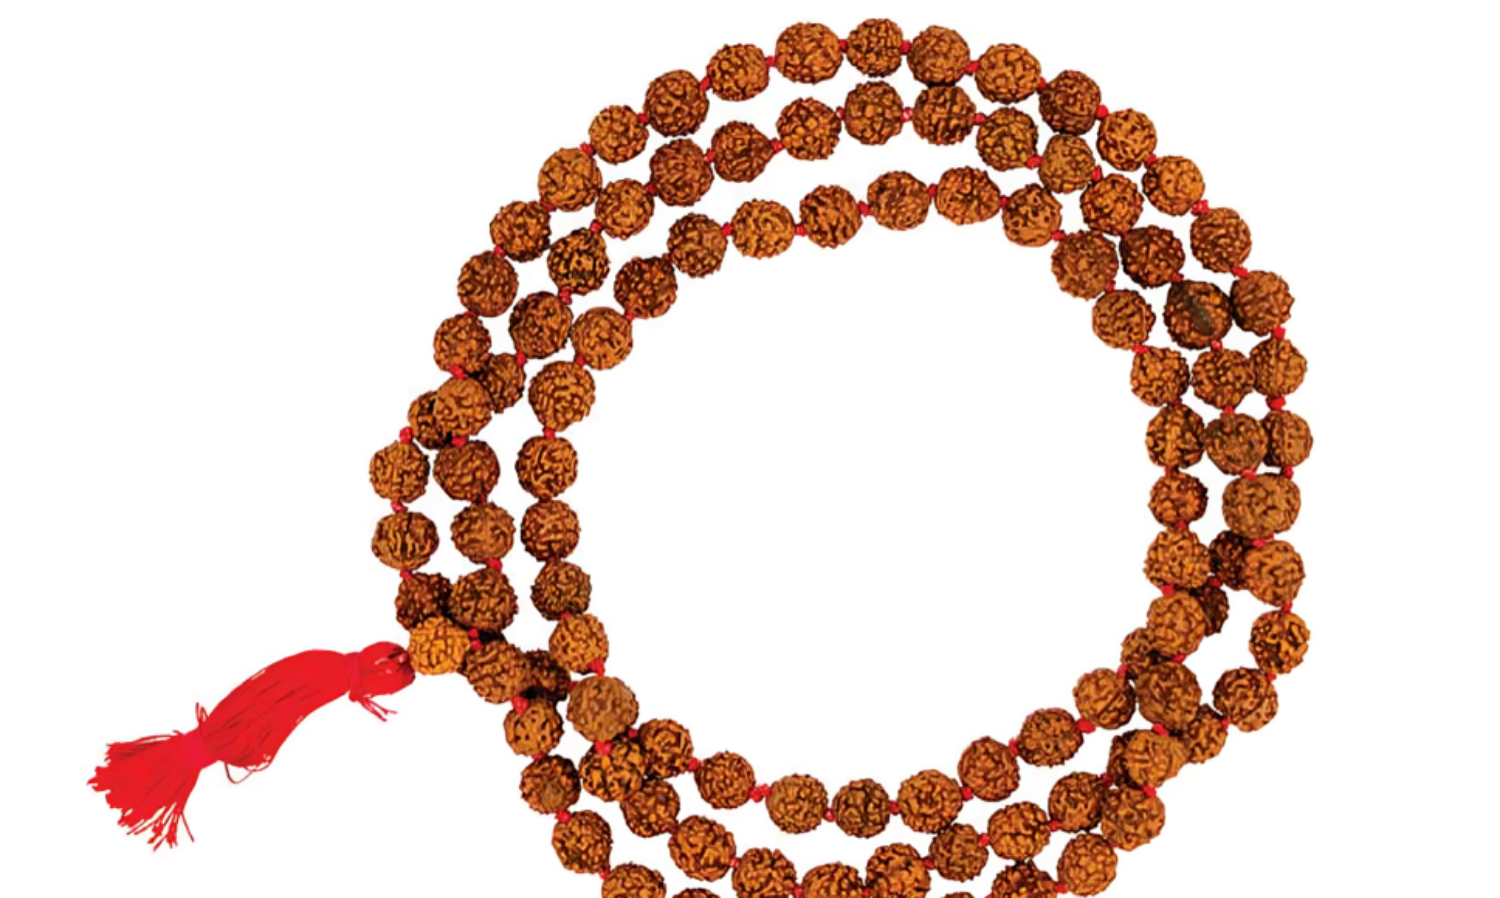 By wearing Rudraksha on Shivratri these wishes are fulfilled, read the significance of each Rudraksha की तस्वीर